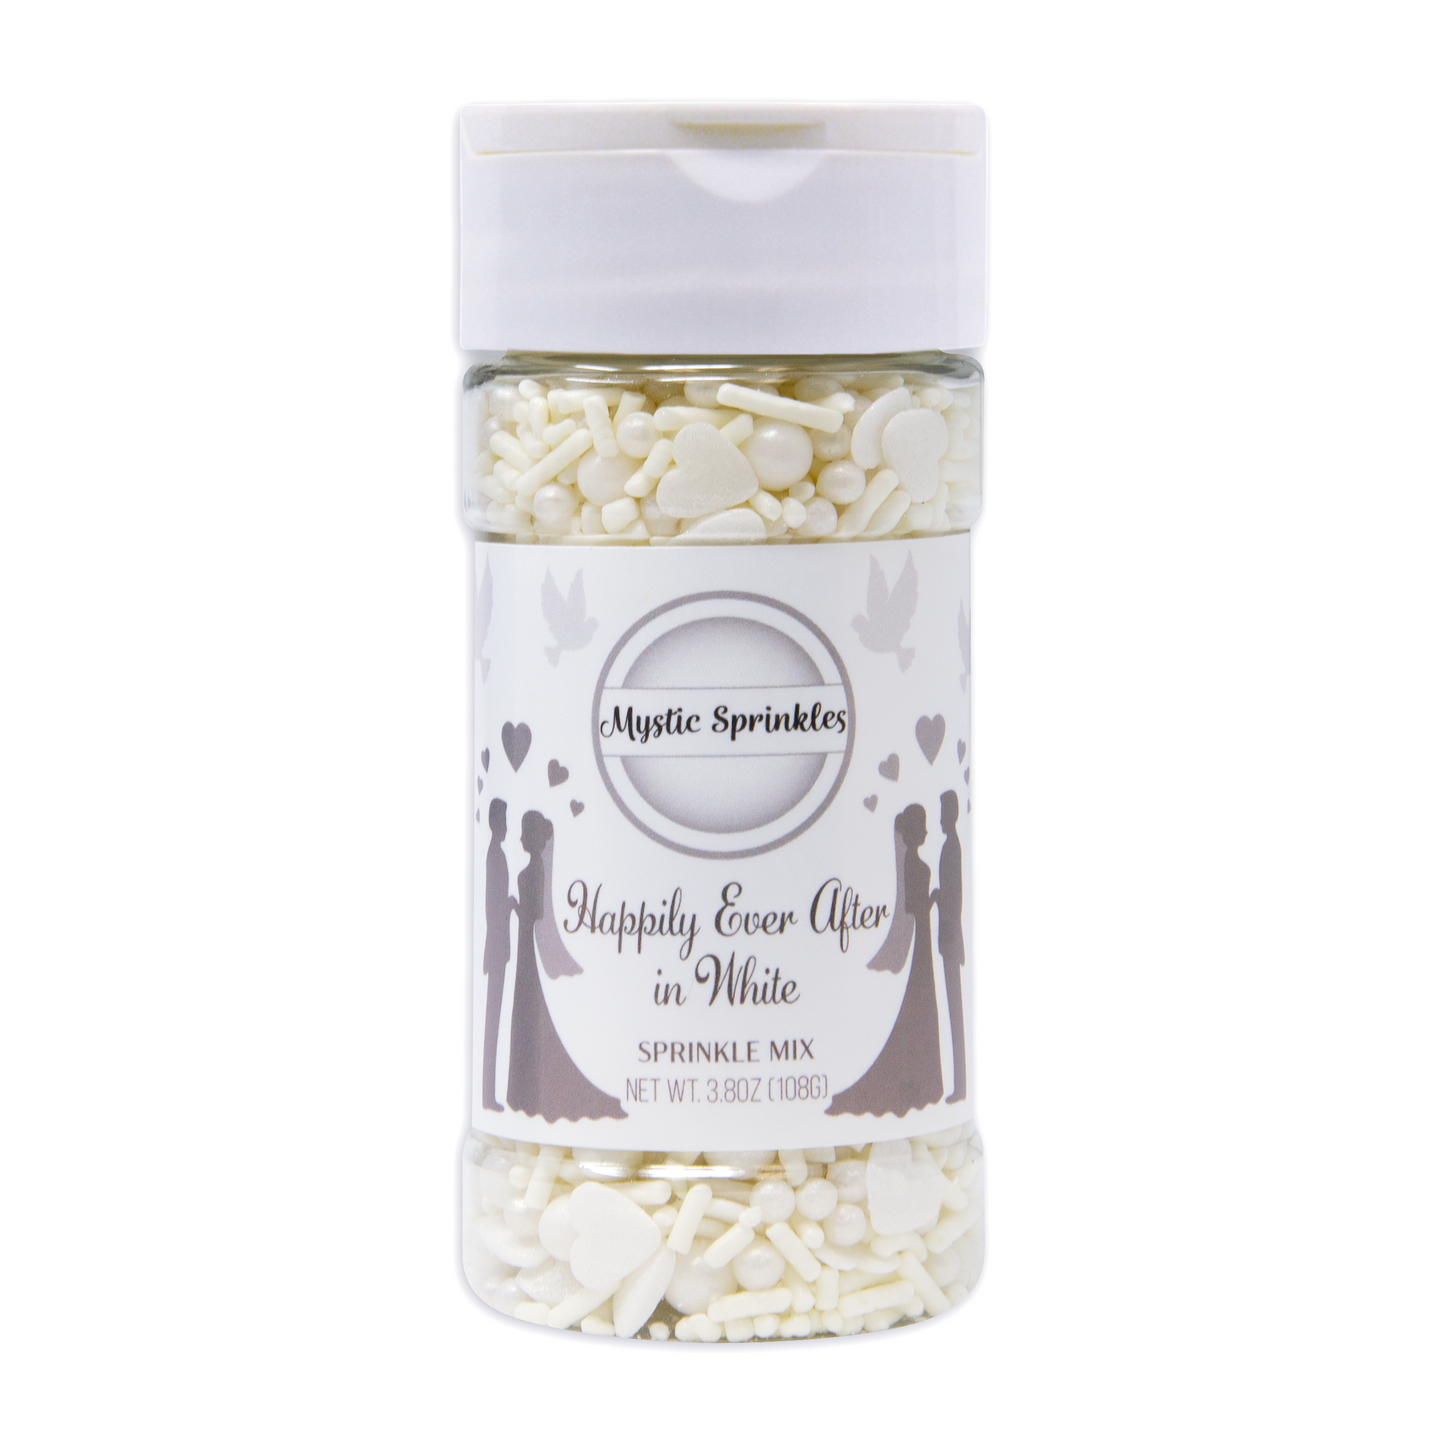 Load image into Gallery viewer, Happily Ever After in White Sprinkle Mix 3.8oz
